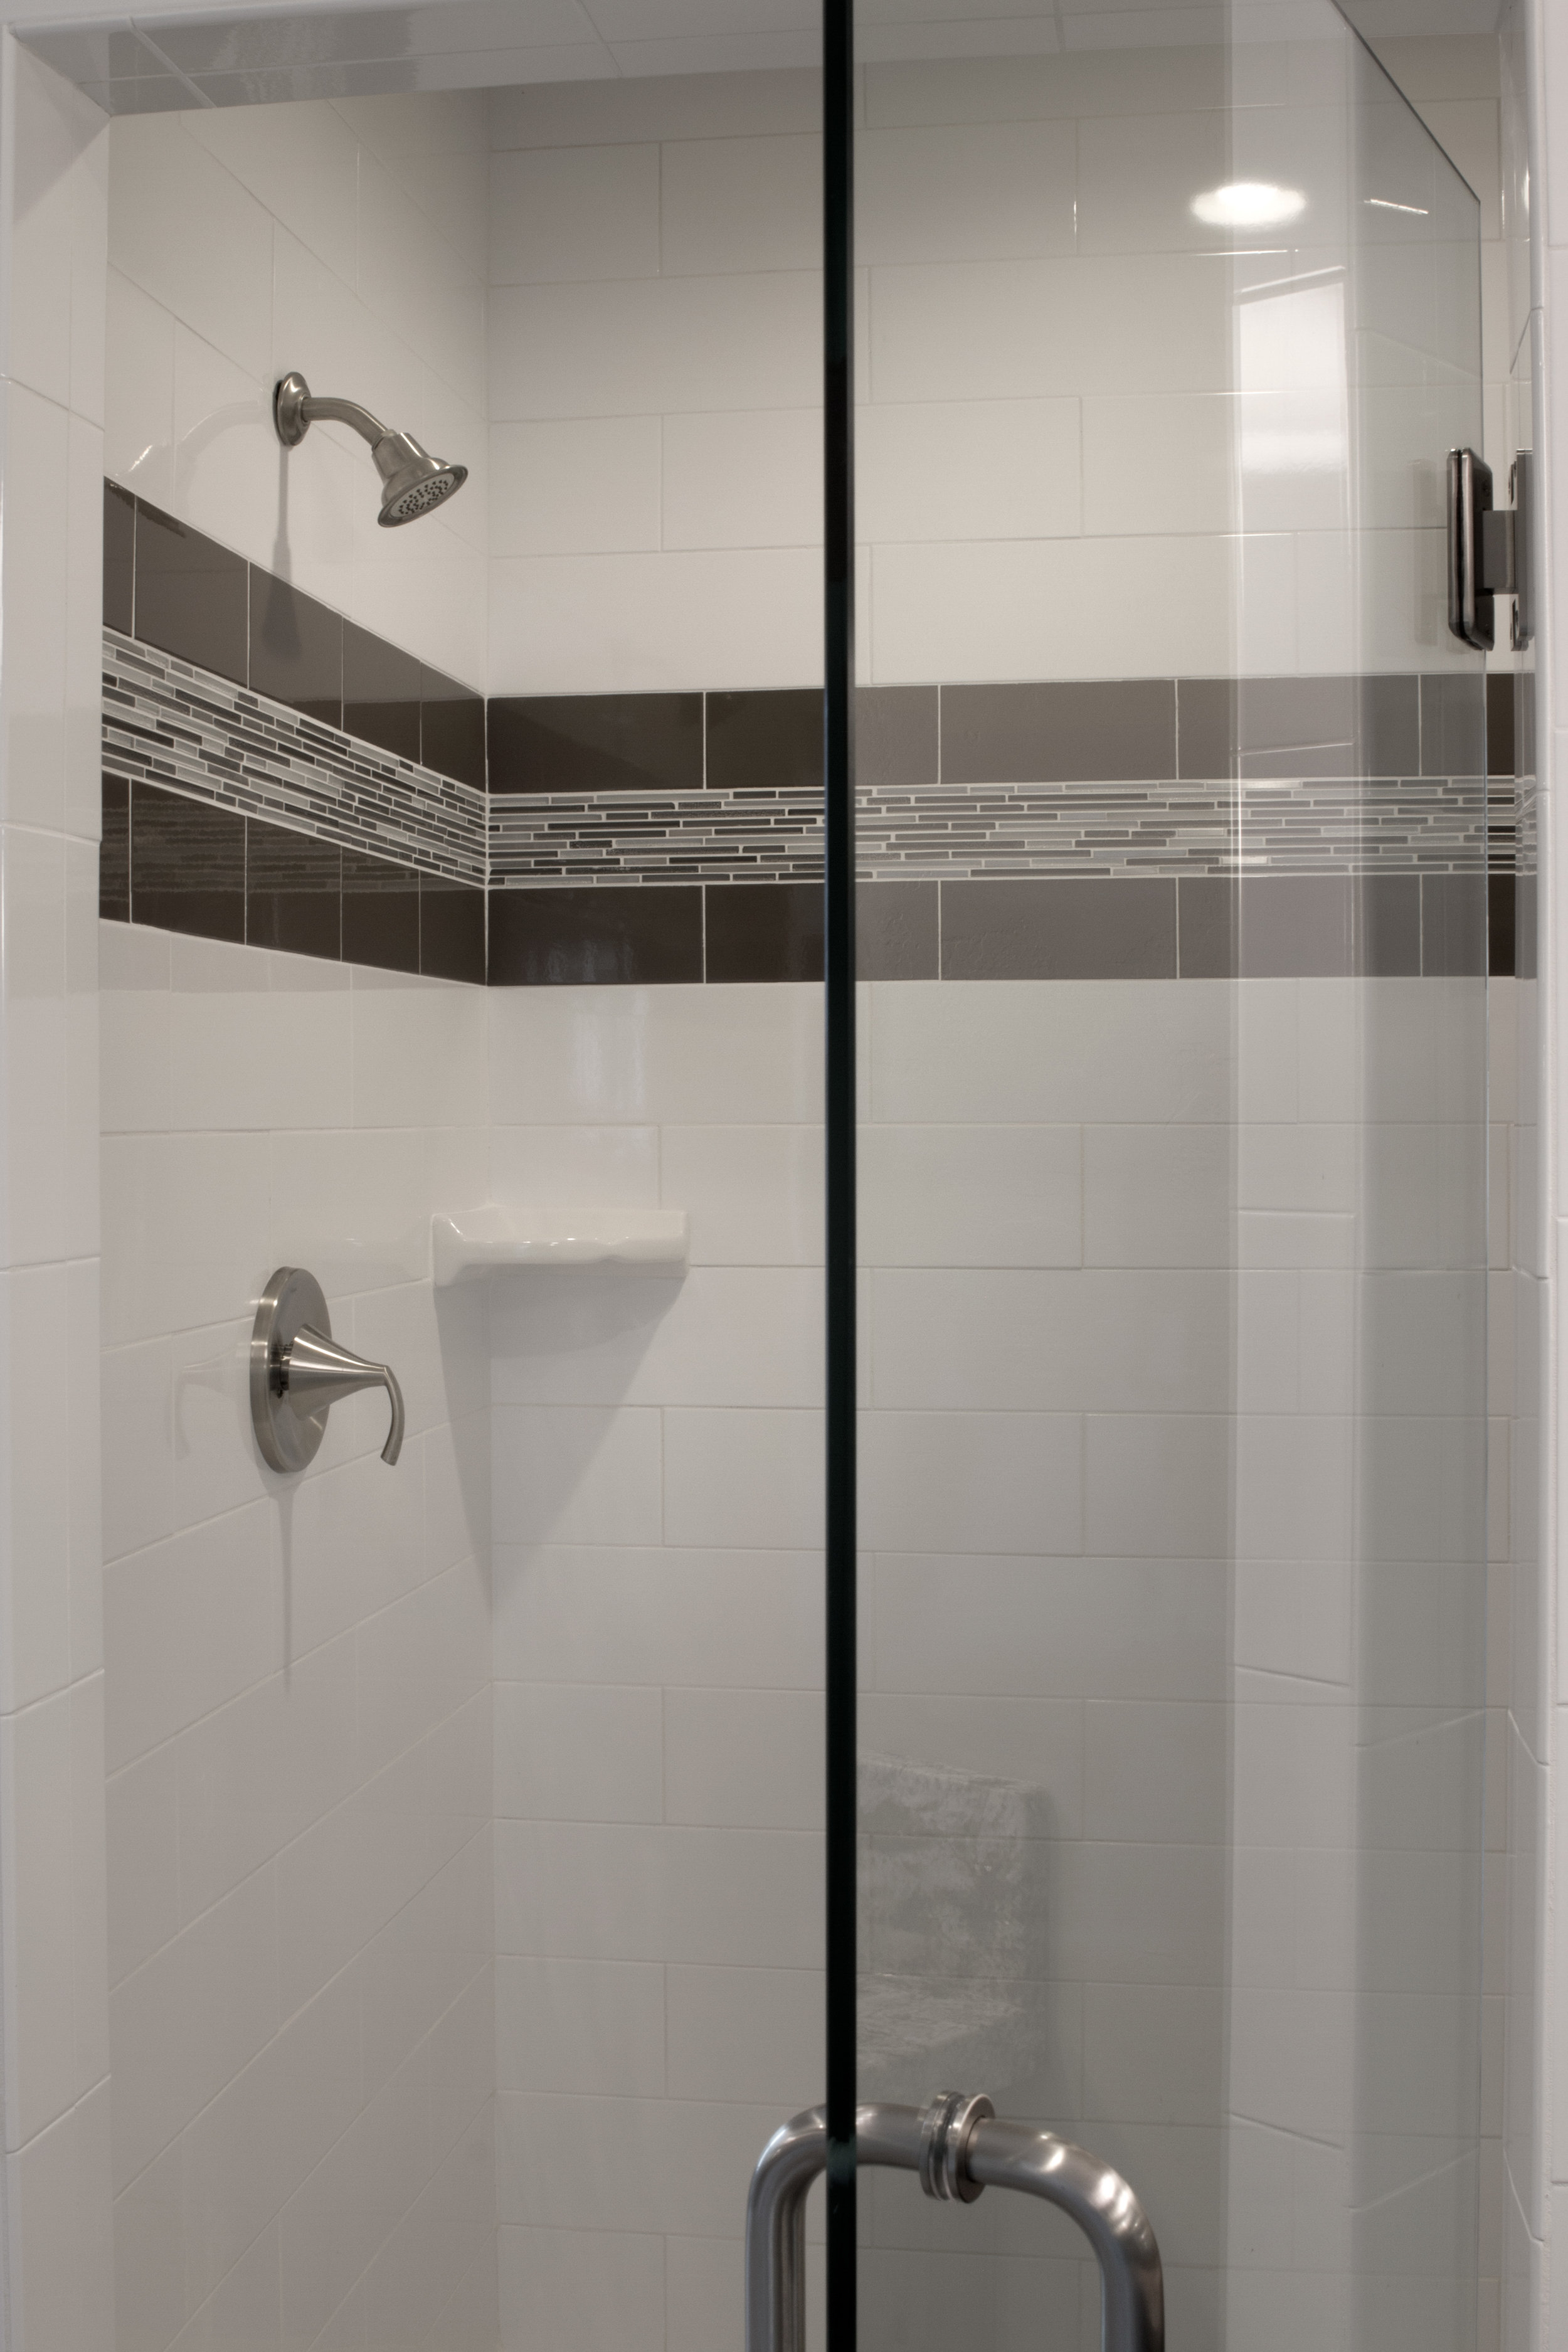 Bathroom Shower Tile In Rigby 5 Star, How To Put Tile In Bathroom Shower